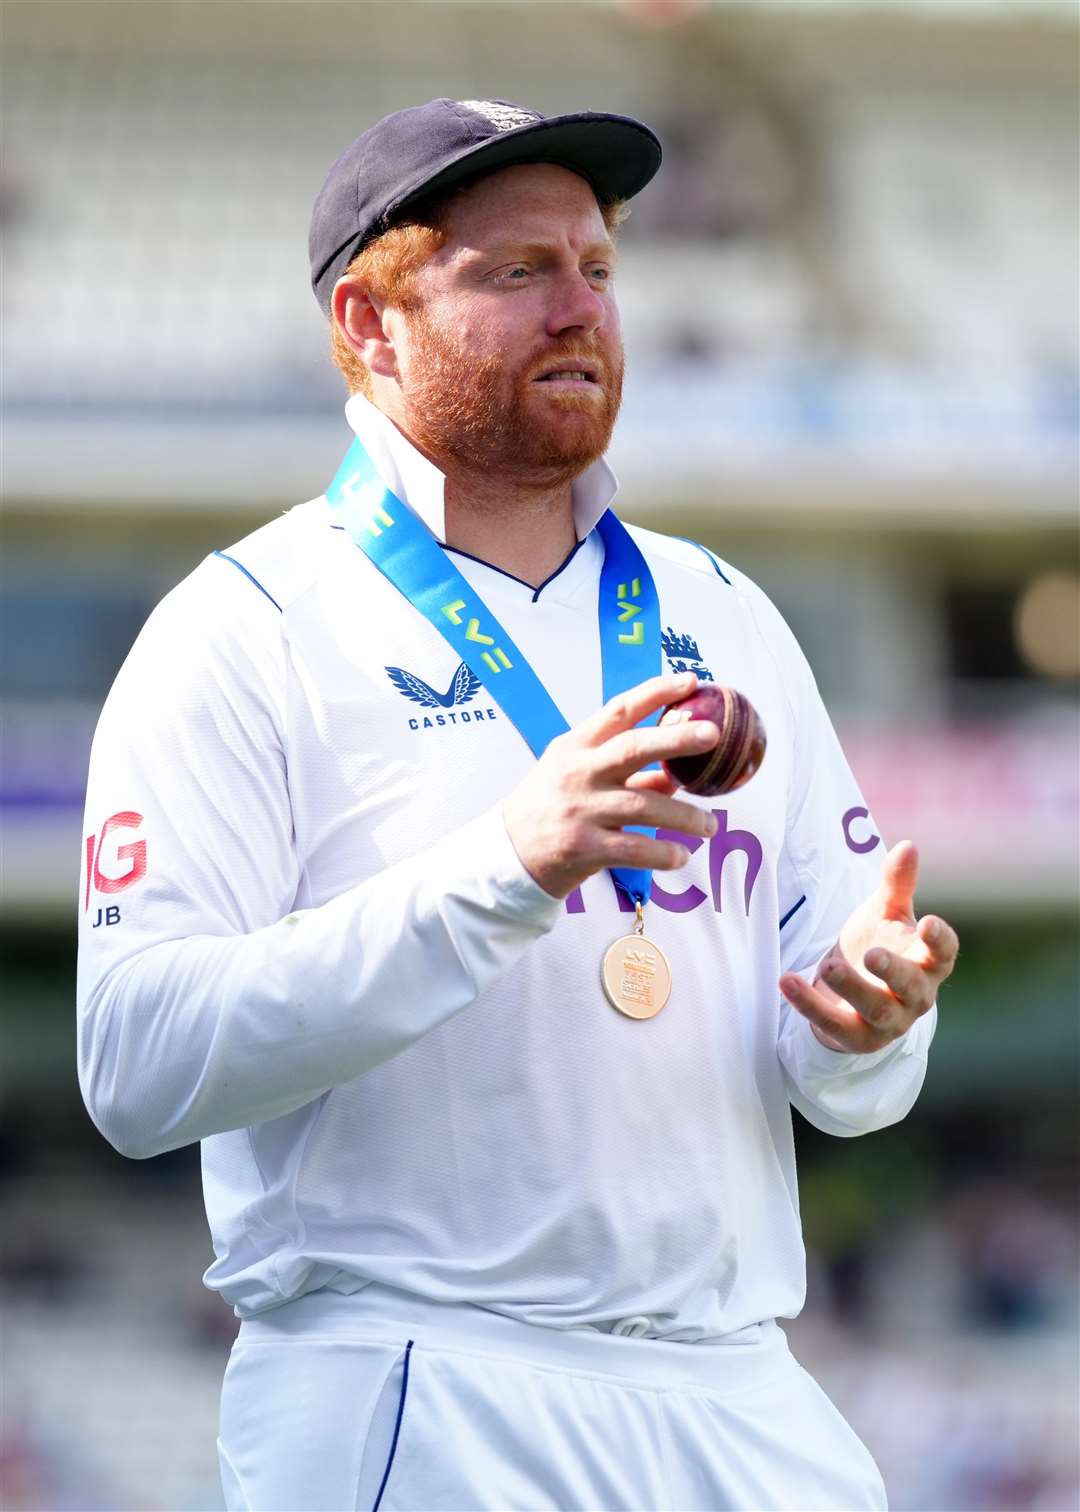 Jonny Bairstow spoke about his excitement ahead of the Men’s Ashes (John Walton/PA)